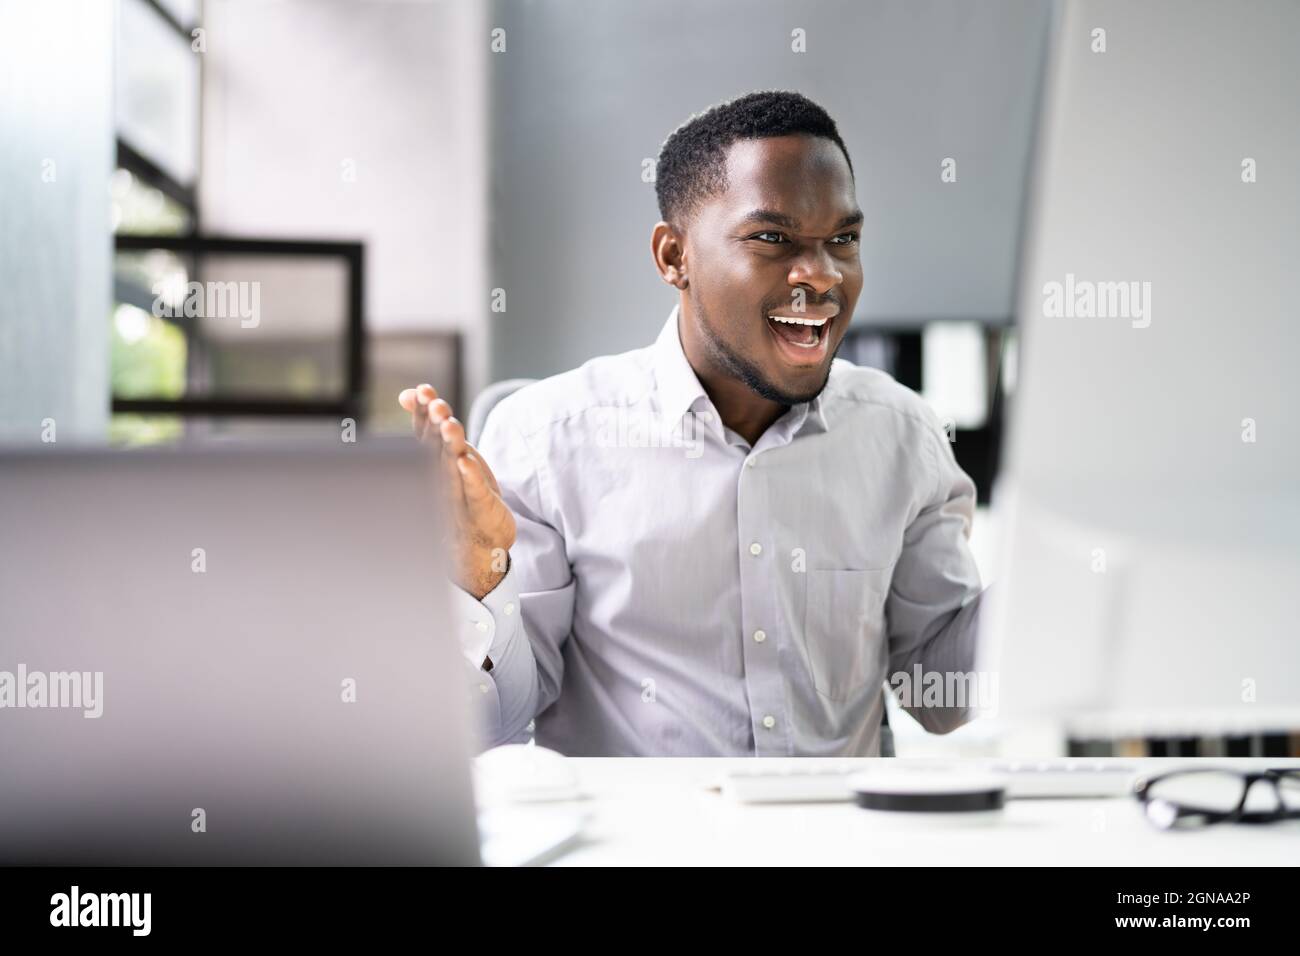 Shocked African Man With Ransomware On Office Computer Stock Photo